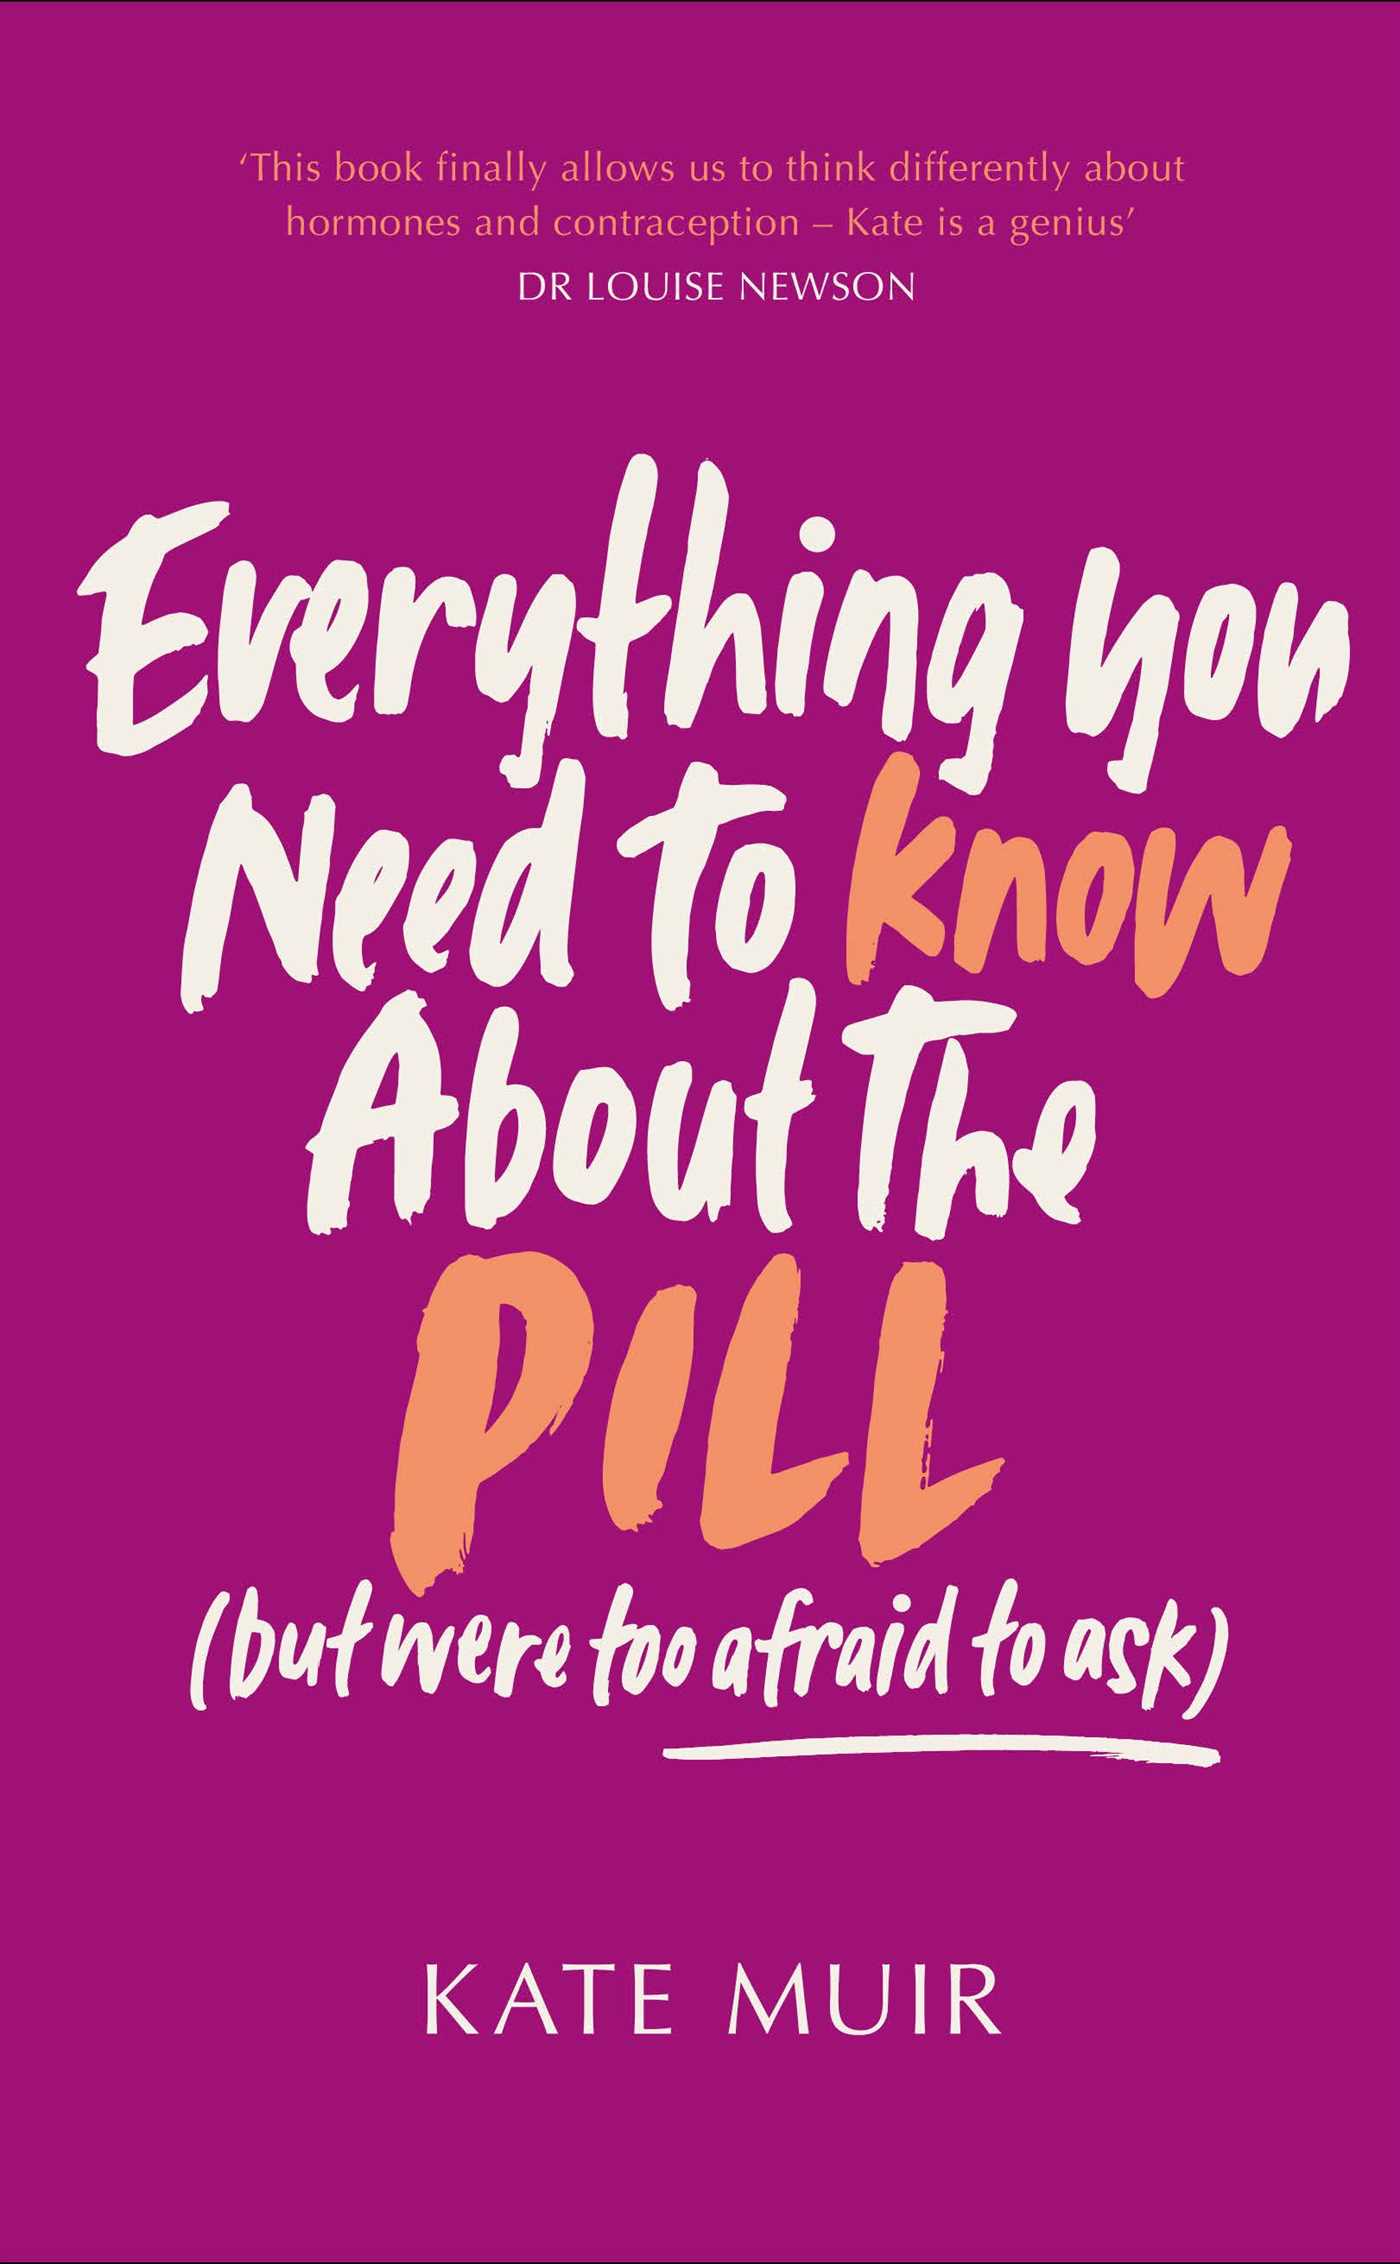 Everything you need to know about the Pill (but were afraid to ask) by Kate Muir